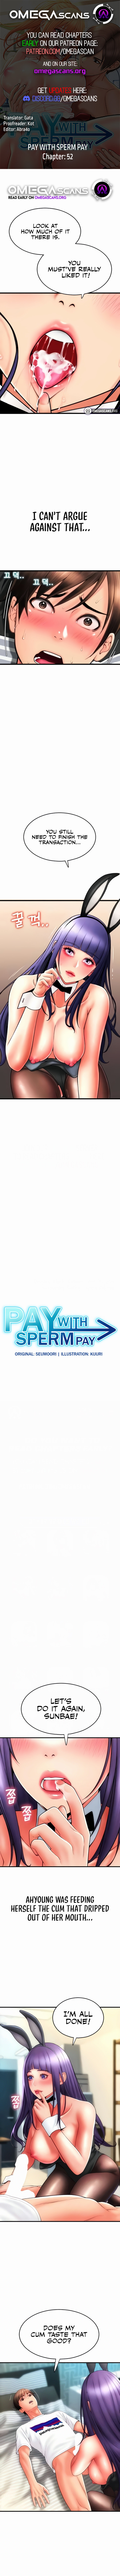 Pay with Sperm Pay - Chapter 52 Page 1